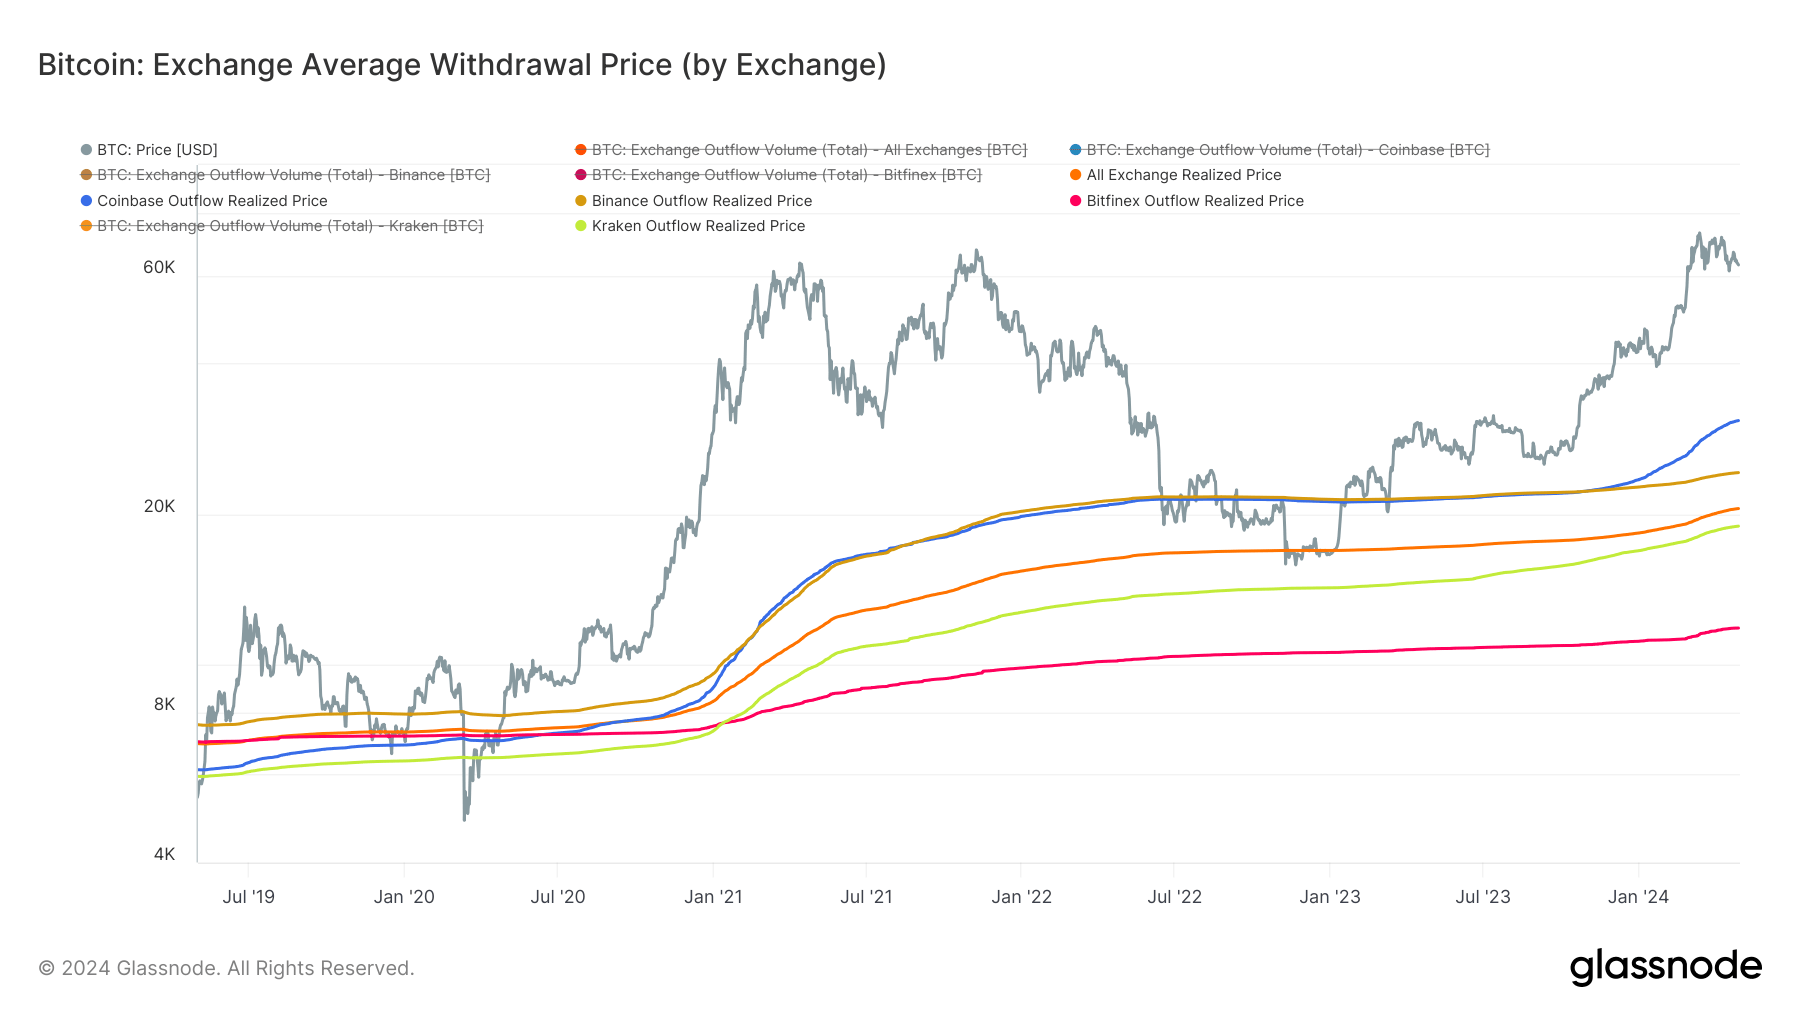 Exchange Average Withdrawal Price by exchange: (Source: Glassnode)